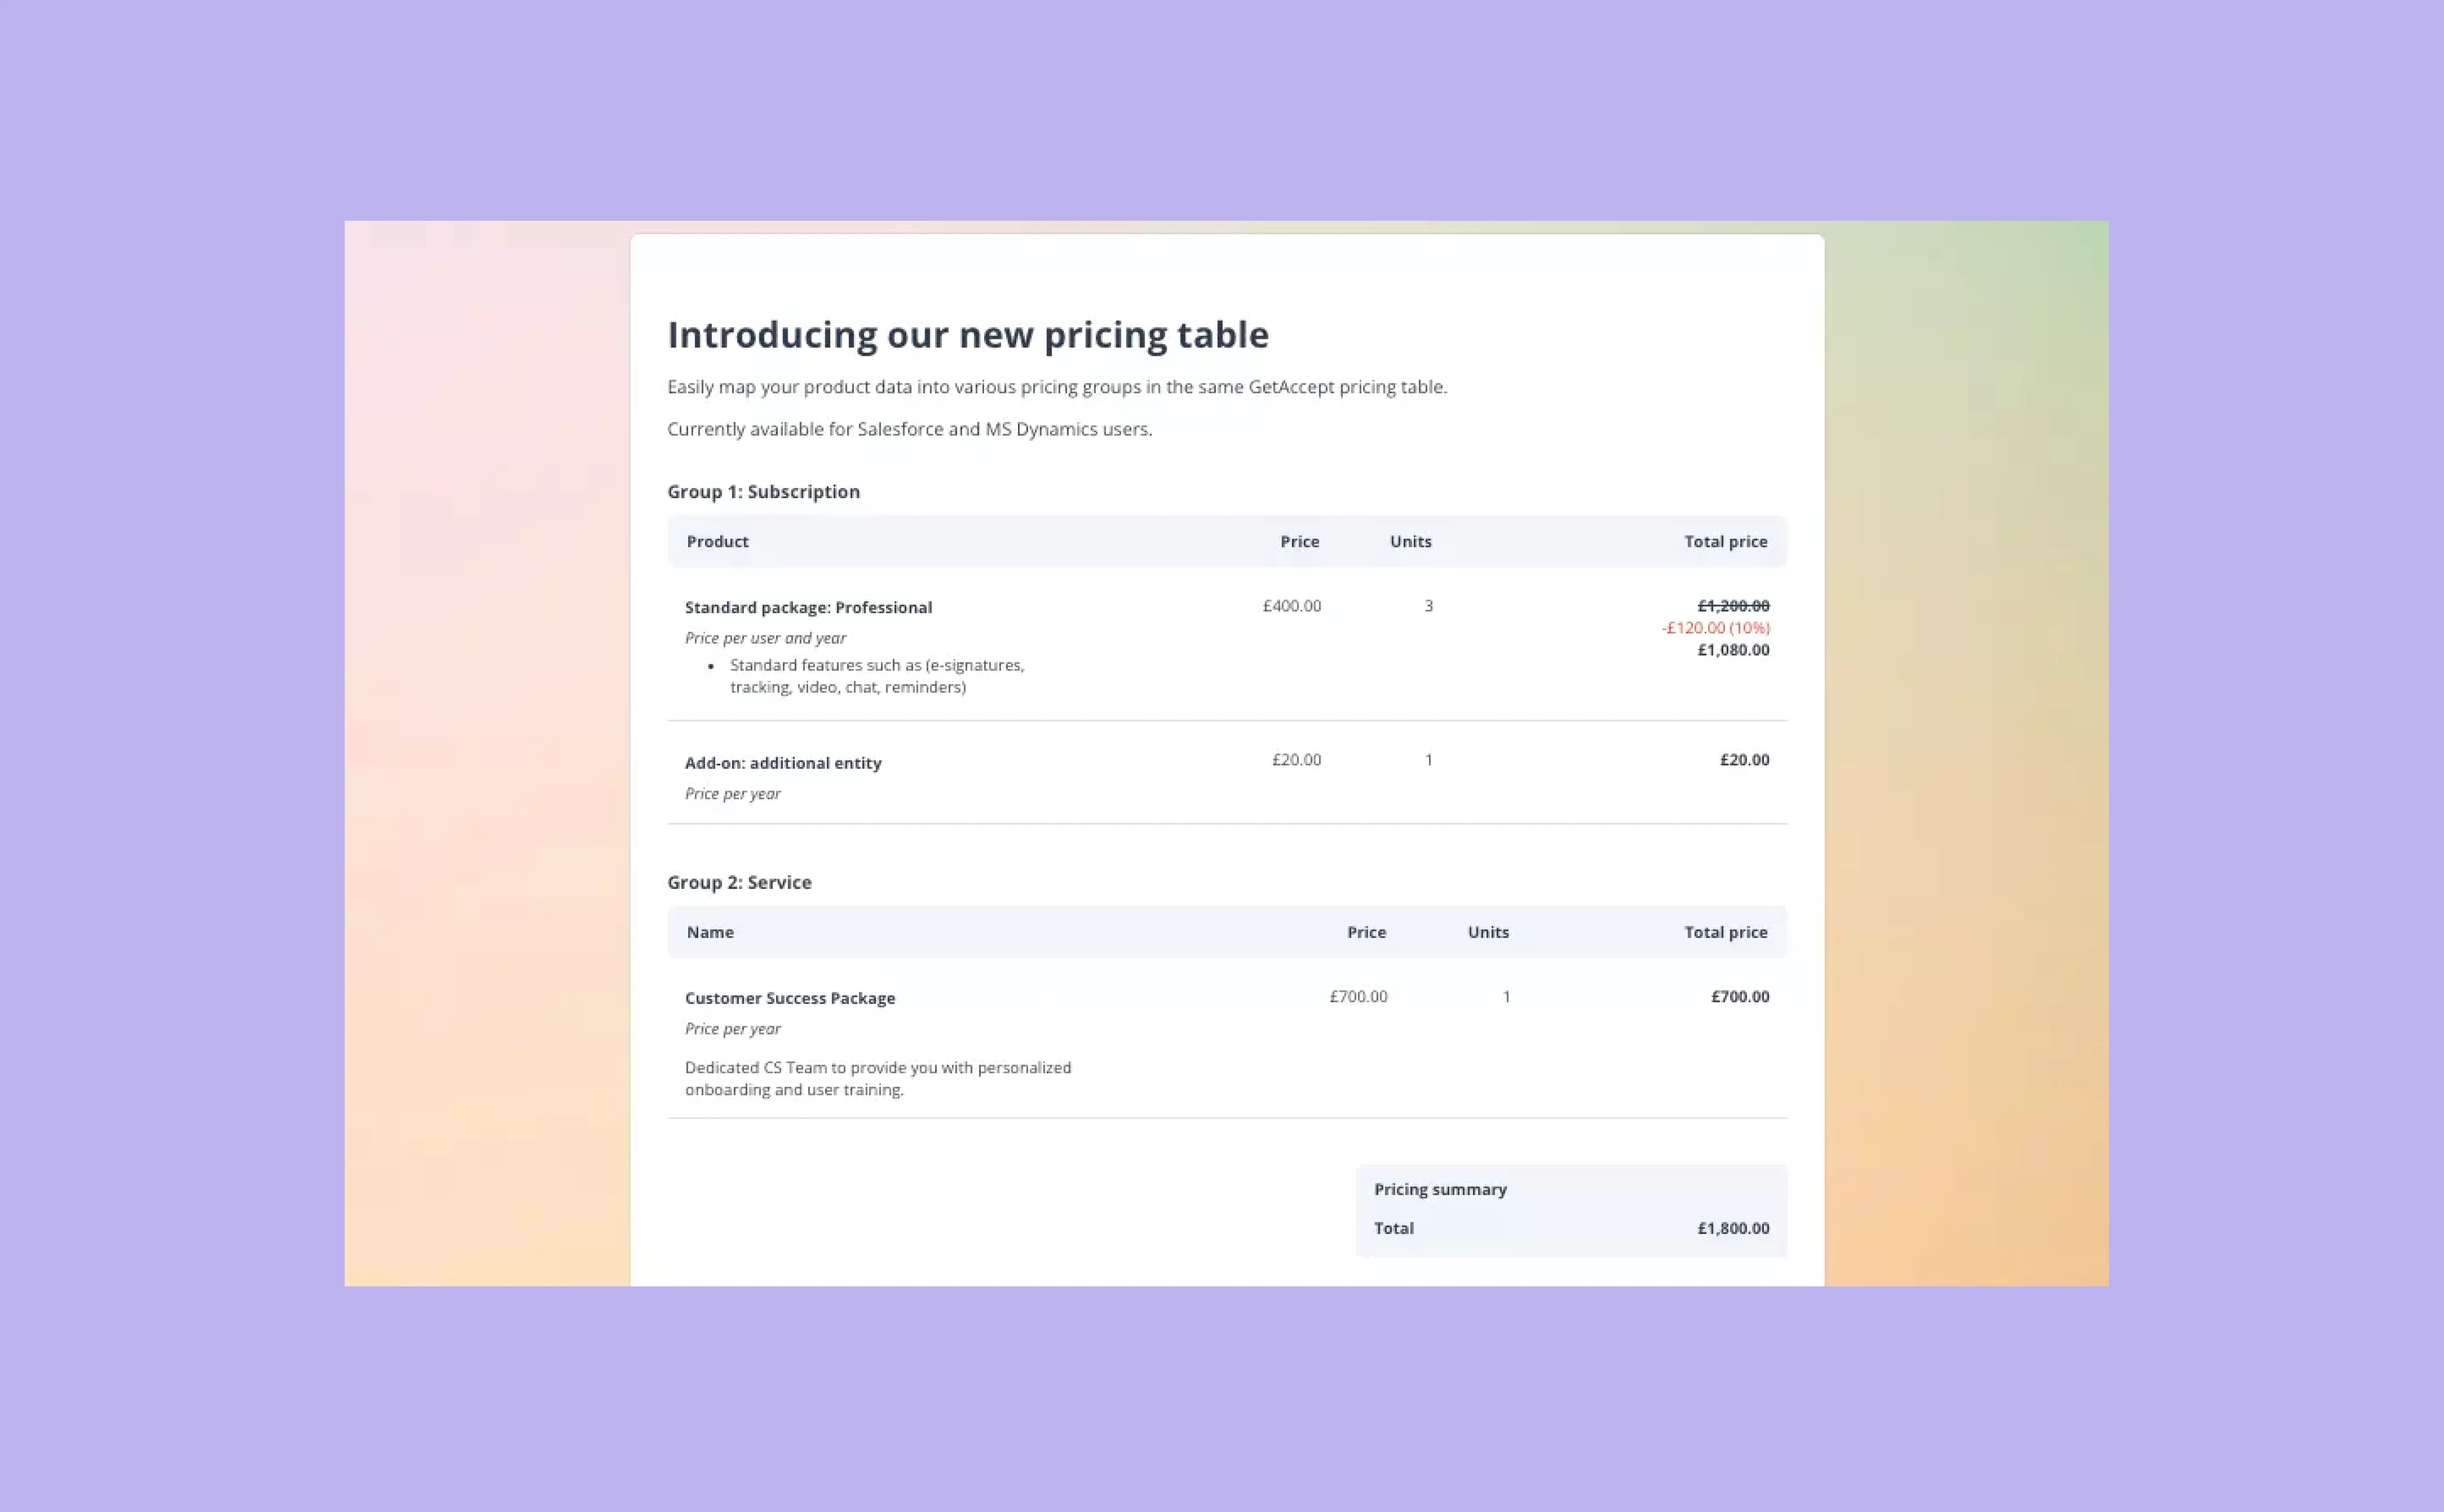 Flexible quoting with multiple pricing groups, tables, and profiles